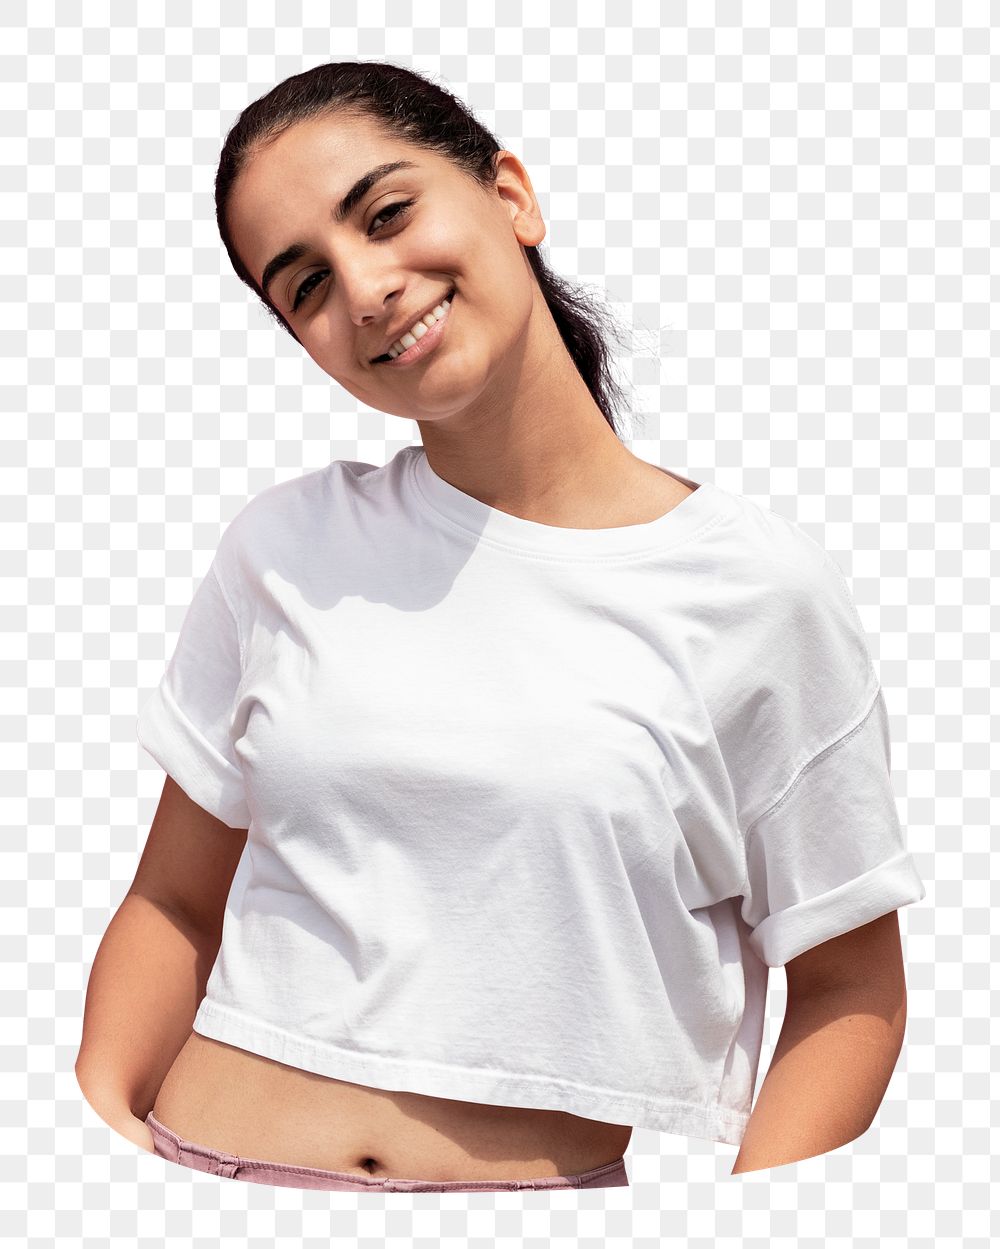 Happy Indian woman png sticker, transparent background